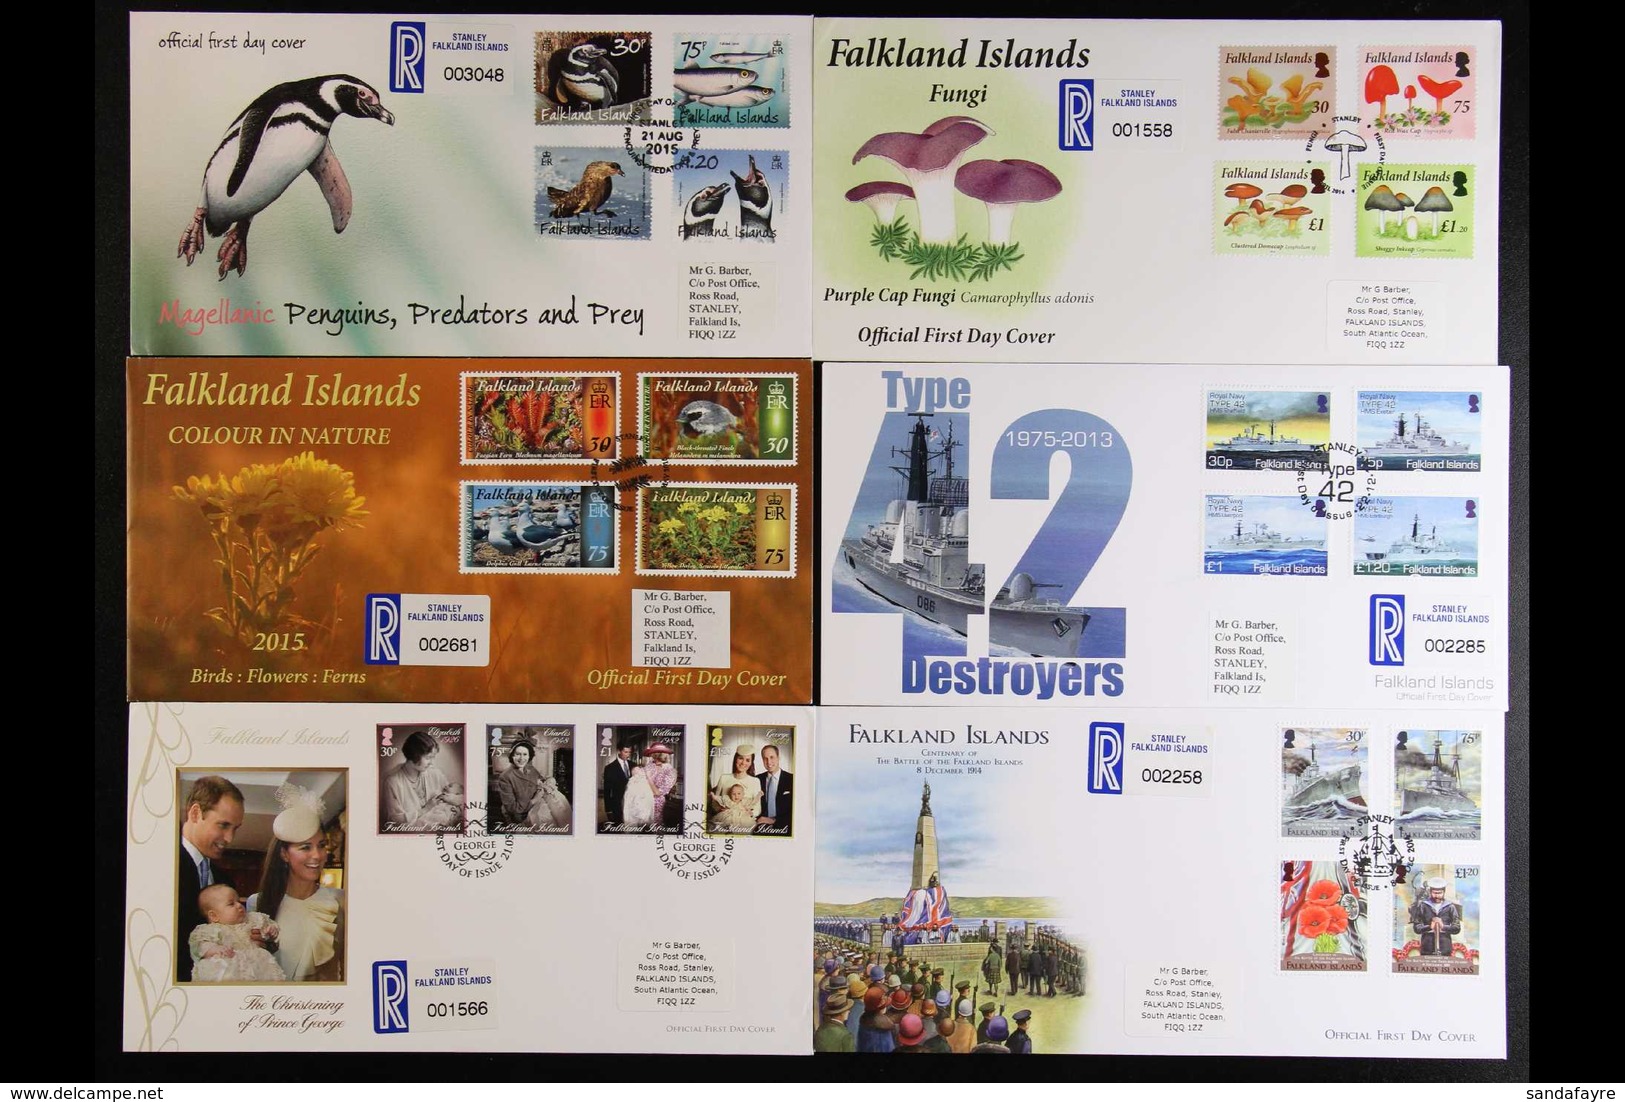 2013-2015 FIRST DAY COVER SELECTION All Different Illustrated Fdc's, Inc 2013 Colour In Nature Set And Shallow Marine Su - Falkland Islands